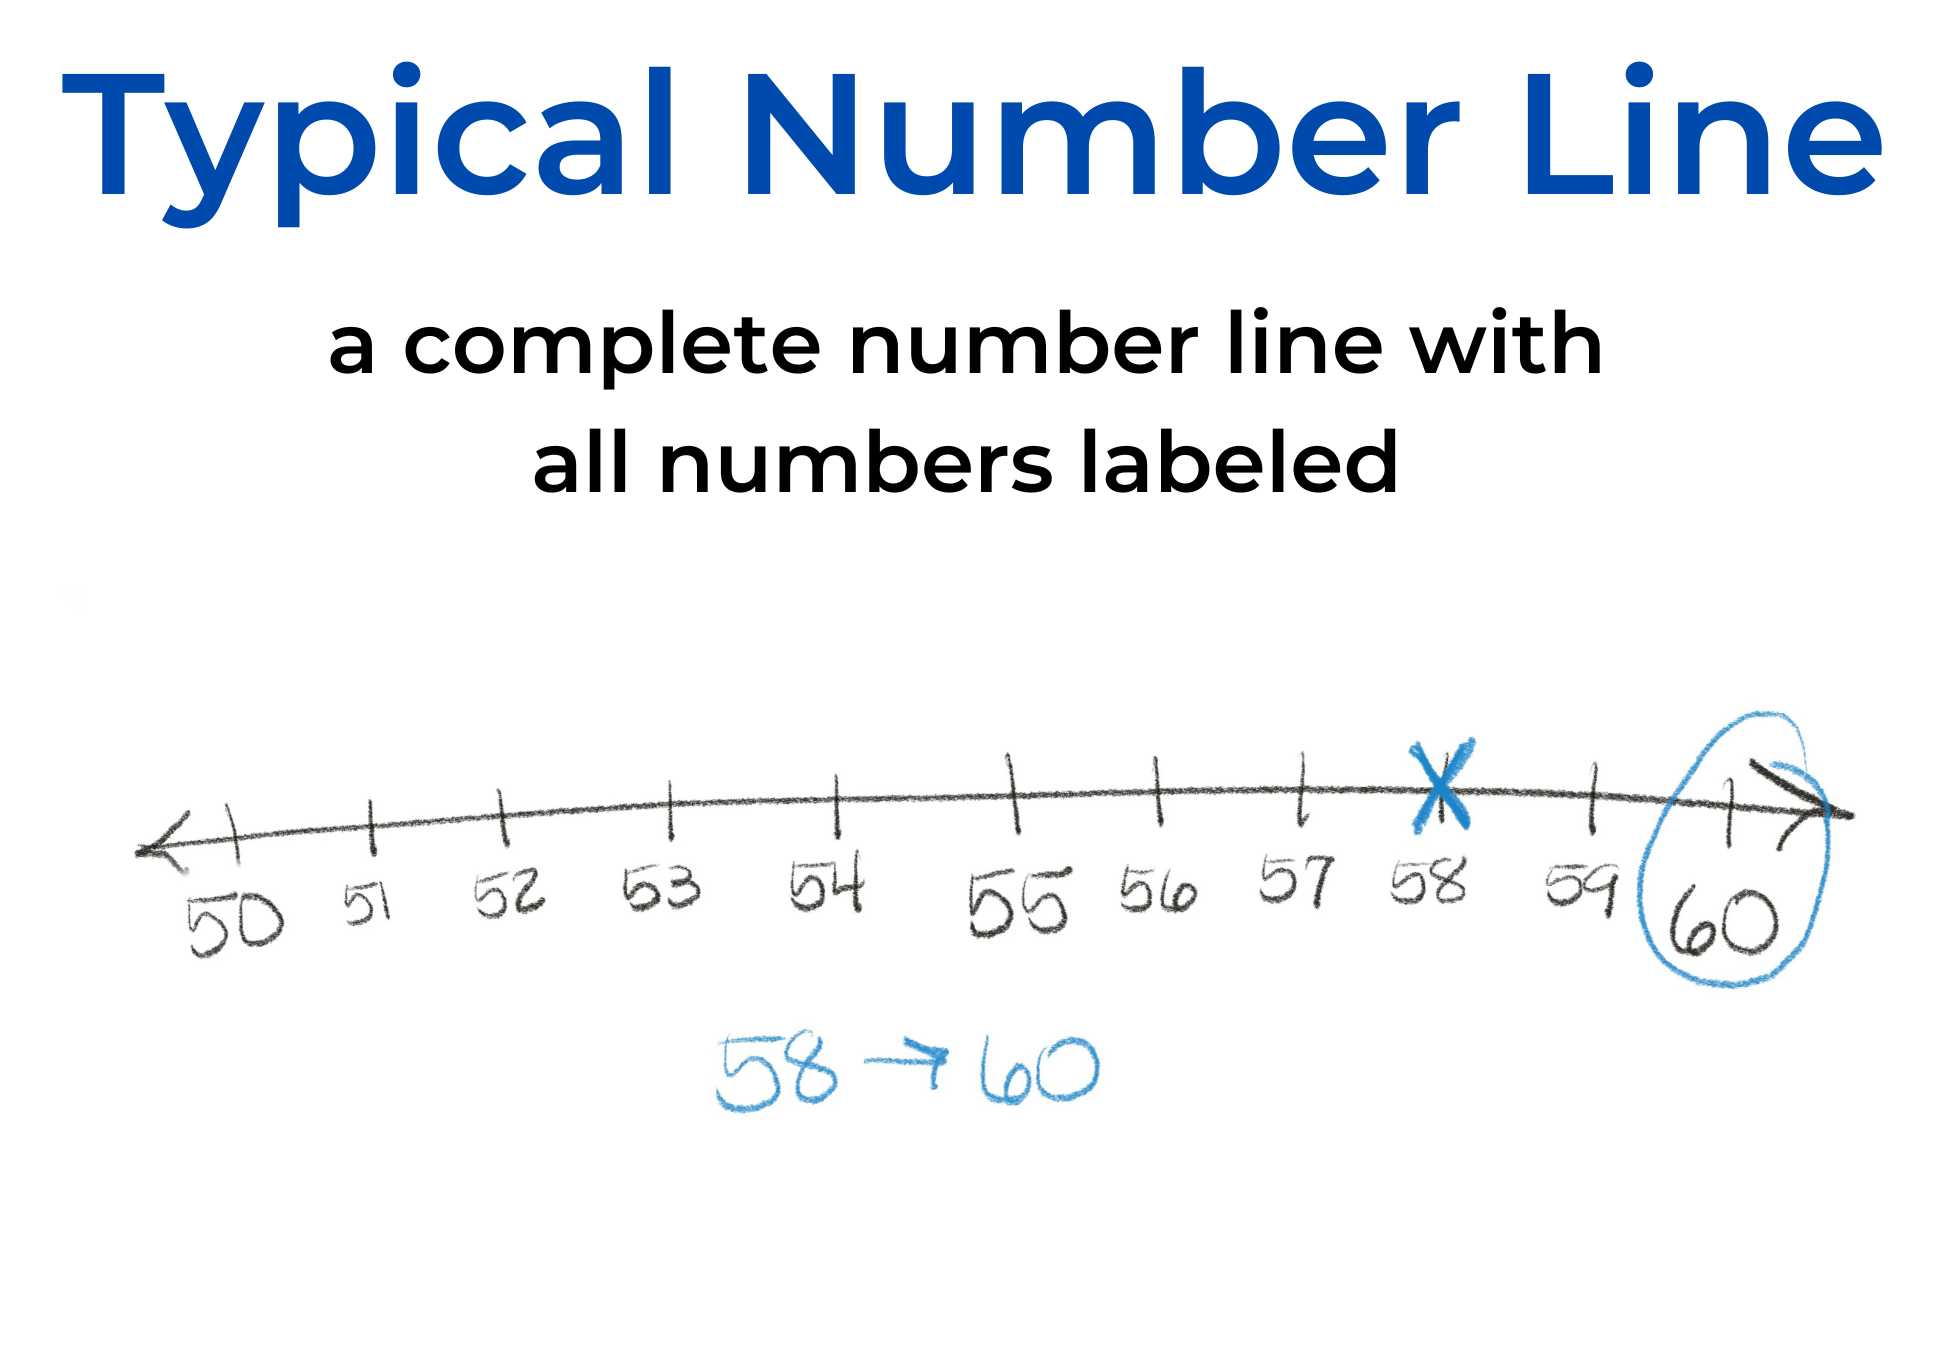 from-confusion-to-confidence-the-magic-of-number-lines-for-rounding-to